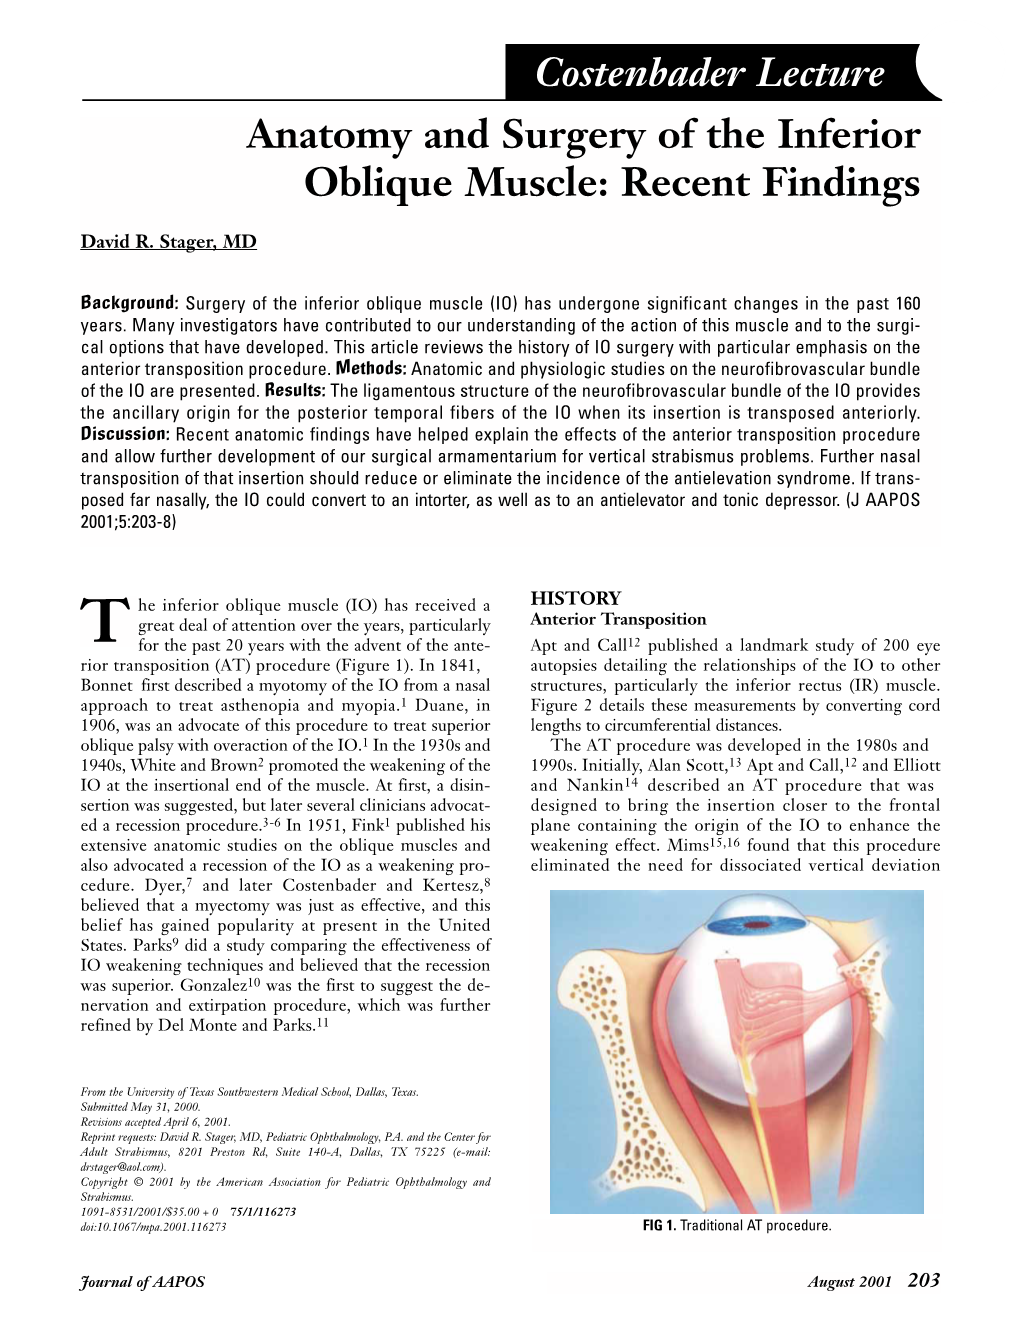 Costenbader Lecture Anatomy and Surgery of the Inferior Oblique Muscle: Recent Findings